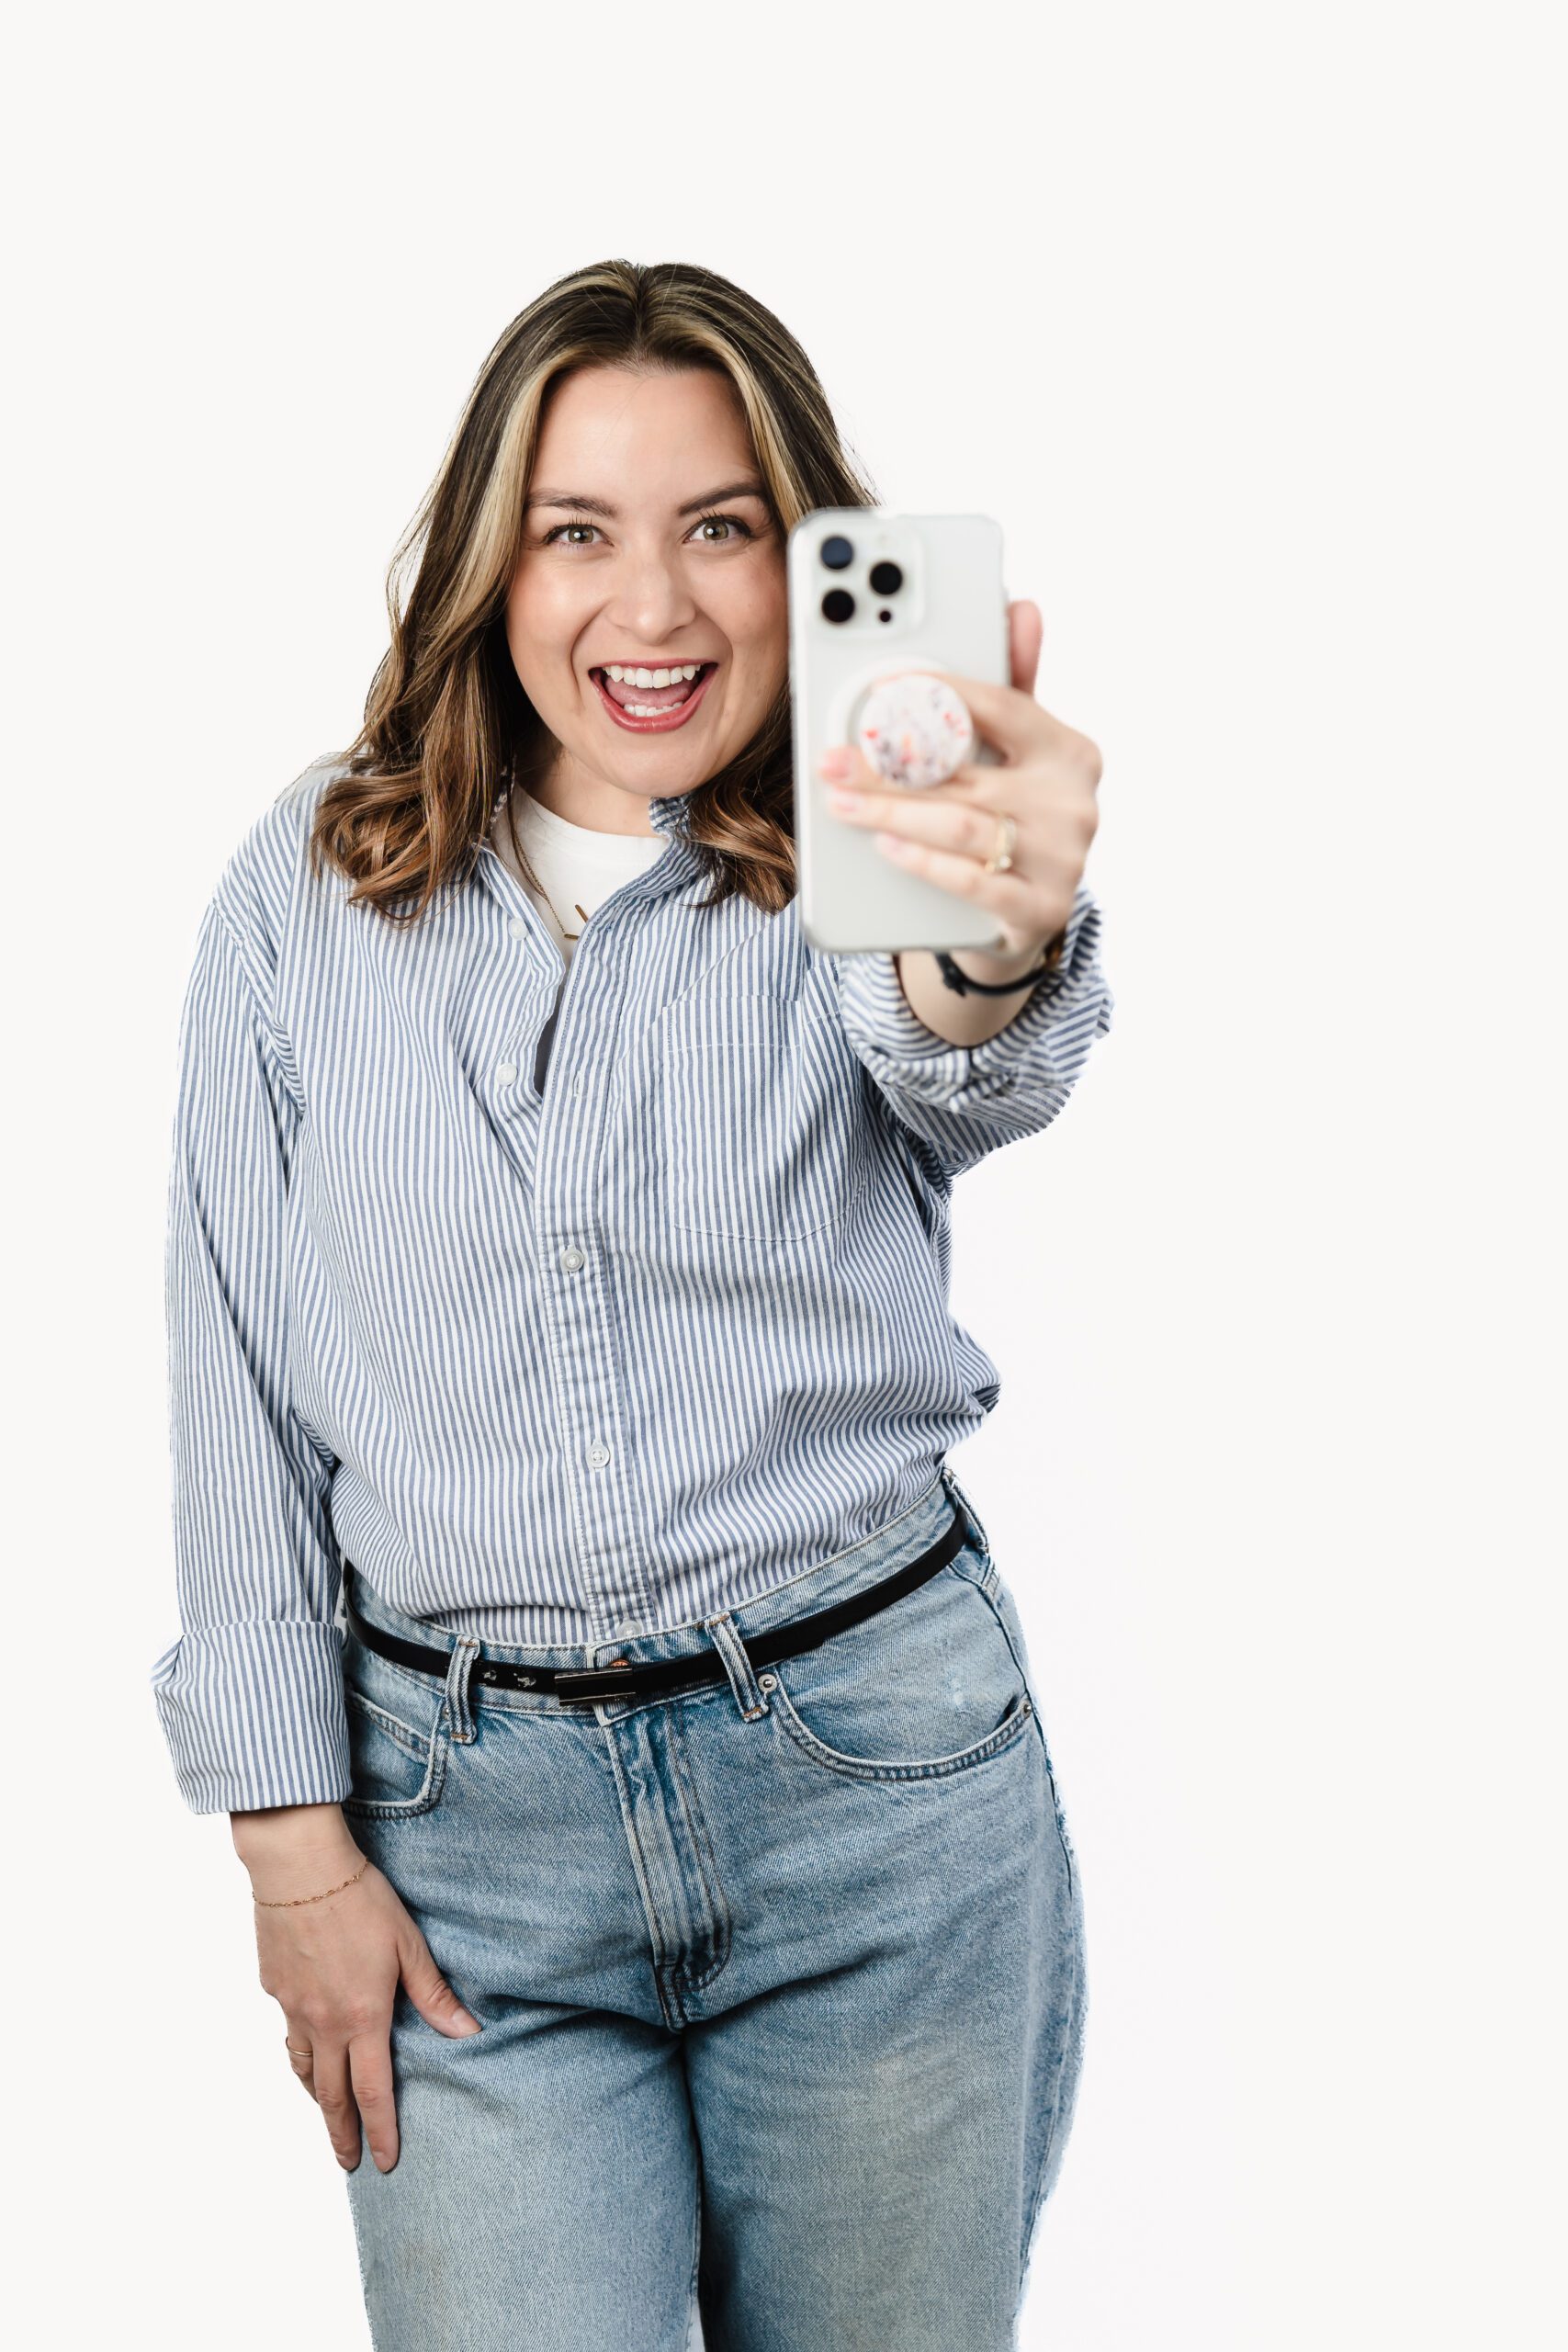 content creator with her phone posing for a brand headshot